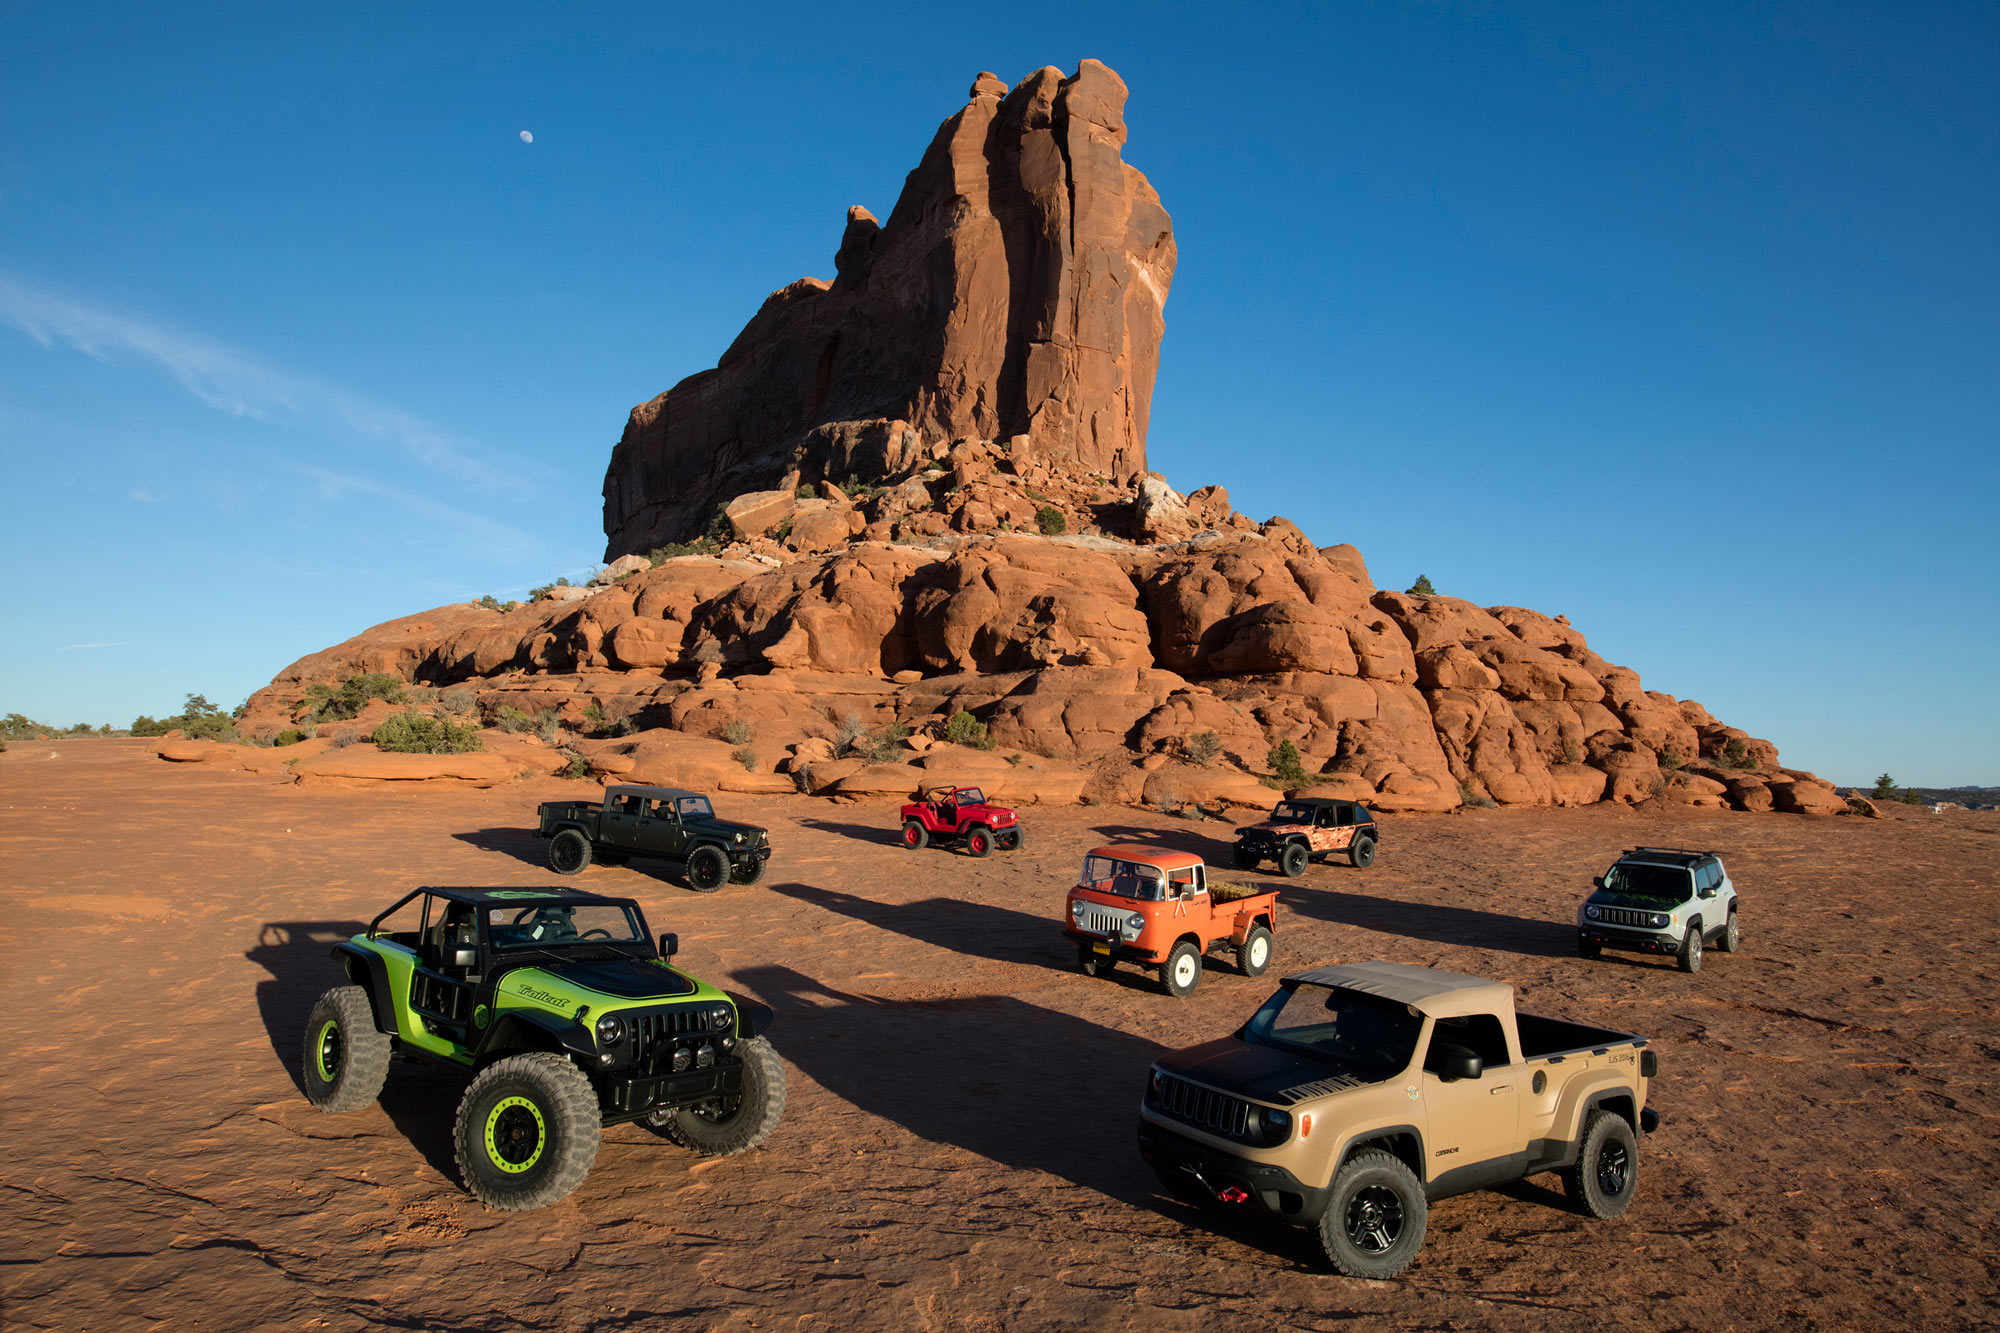 Several Jeeps parked near Moab